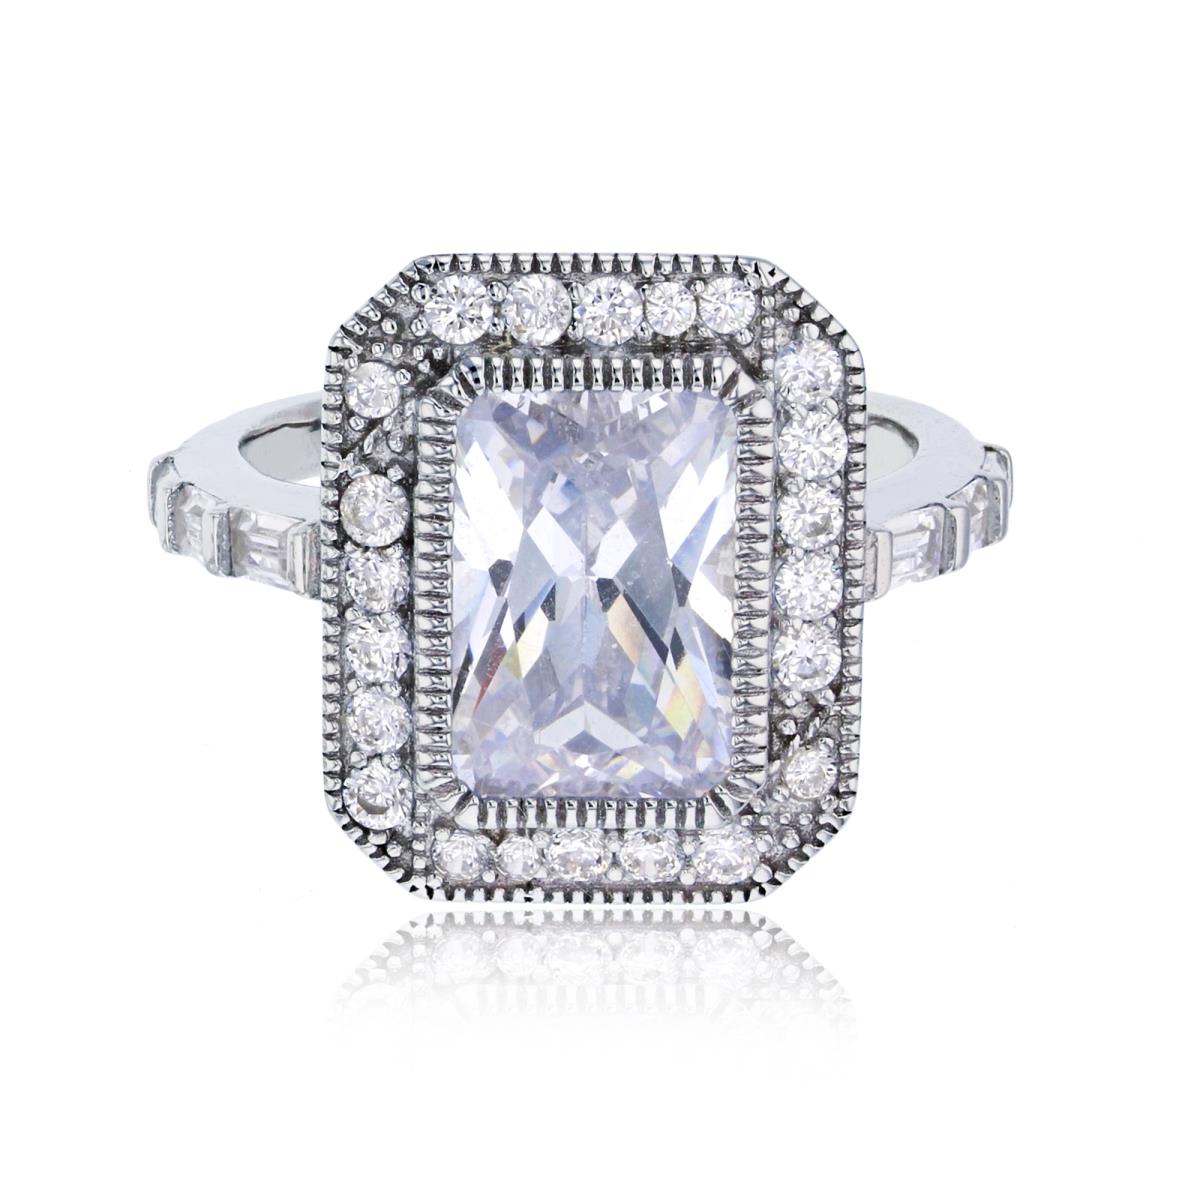 Sterling Silver Rhodium 12x8mm Emerald Cut Halo with Baguette Side Stones Engagement Ring